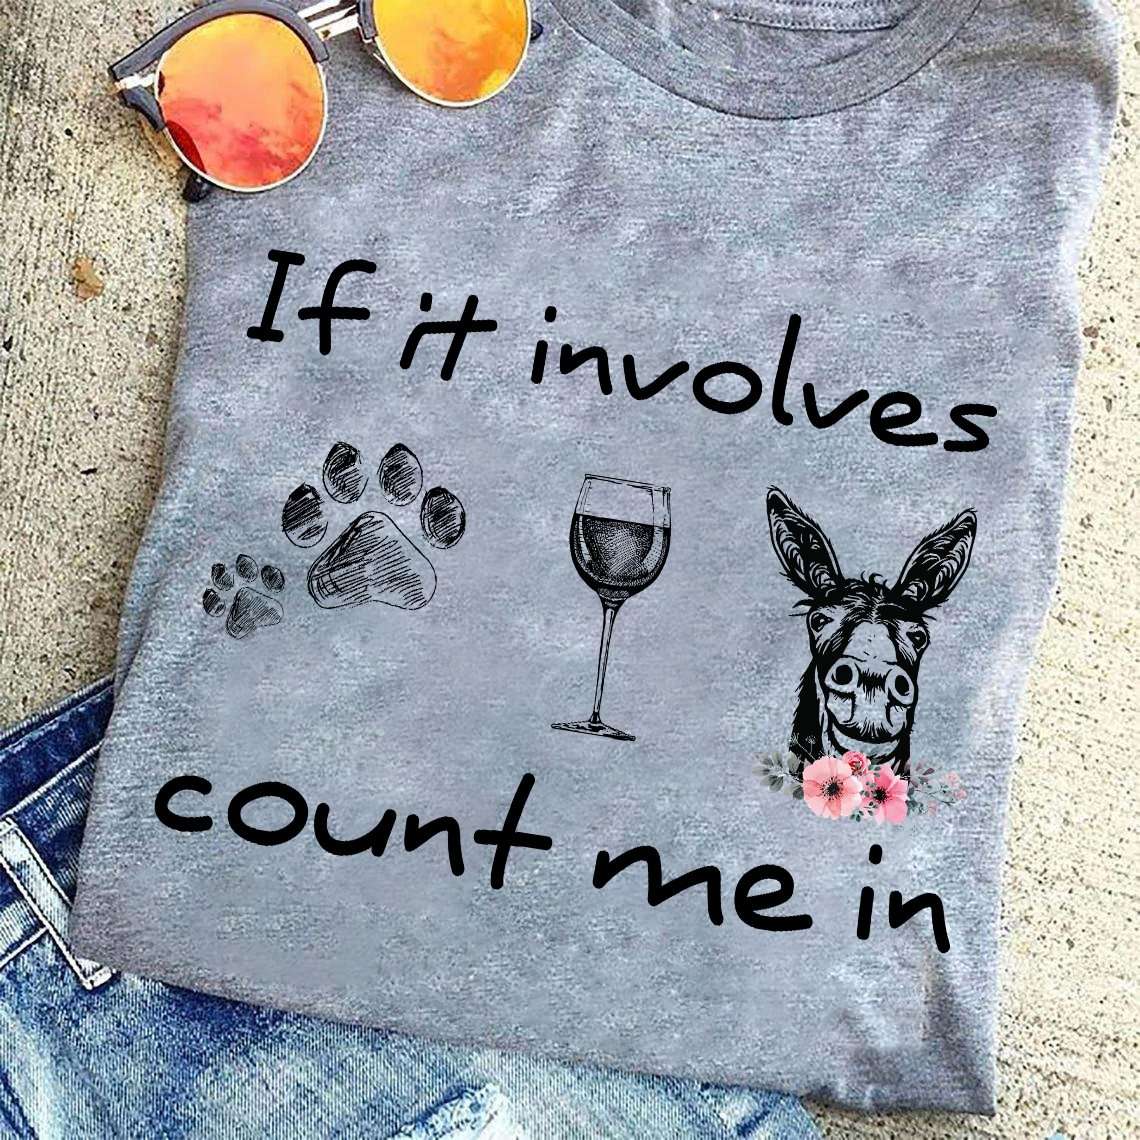 Donkey Dog Wine - If in involves count me in